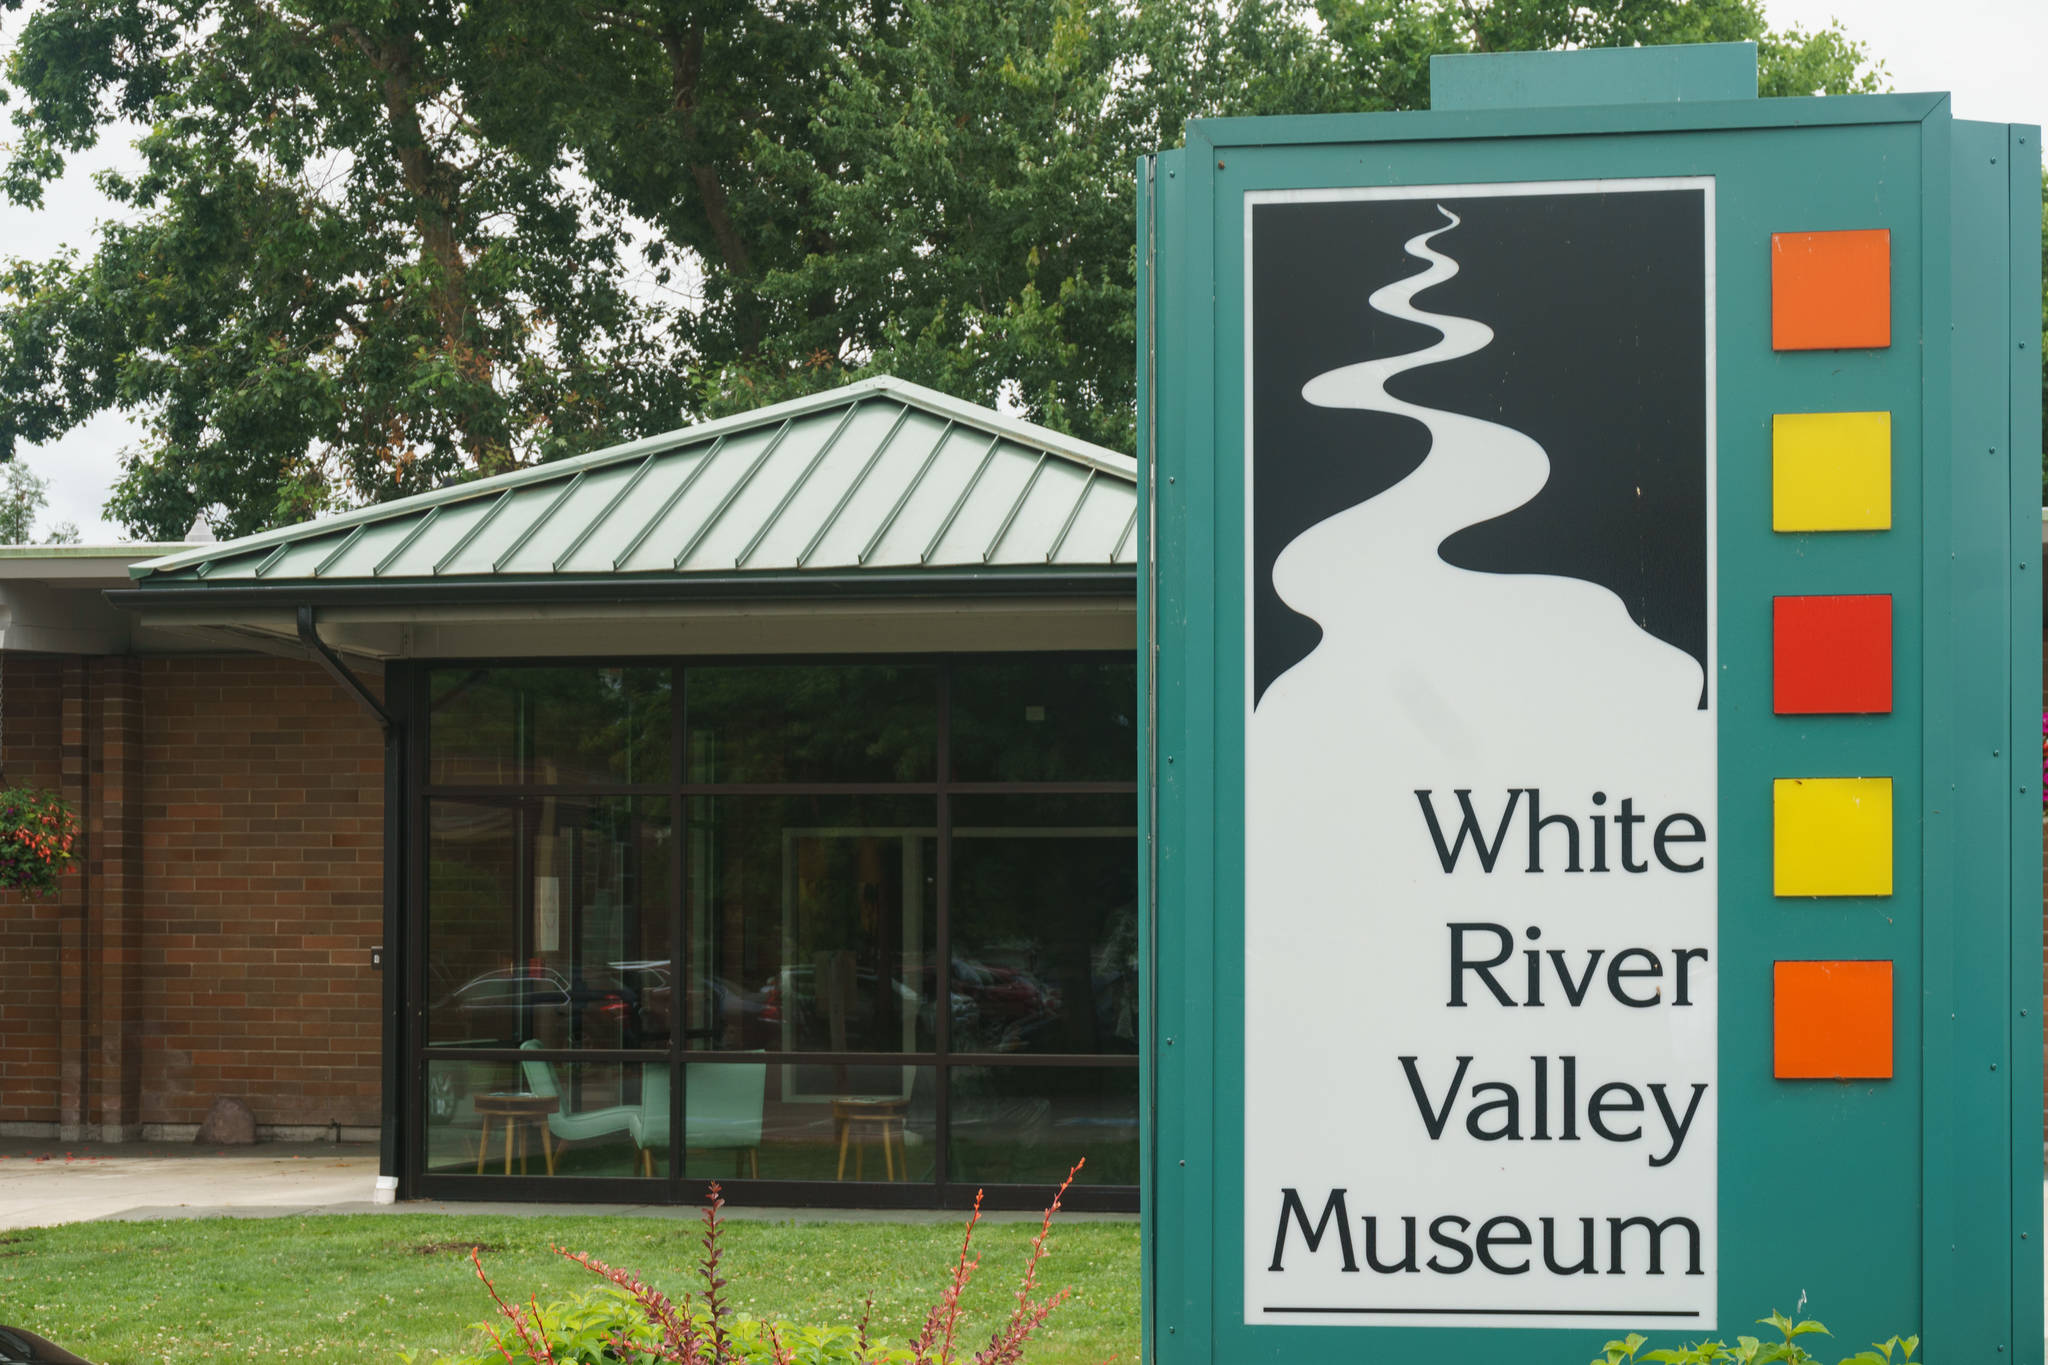 Photo by Henry Stewart-Wood
Entrance to the White River Valley Museum in Auburn, photo taken on July 1, 2021.